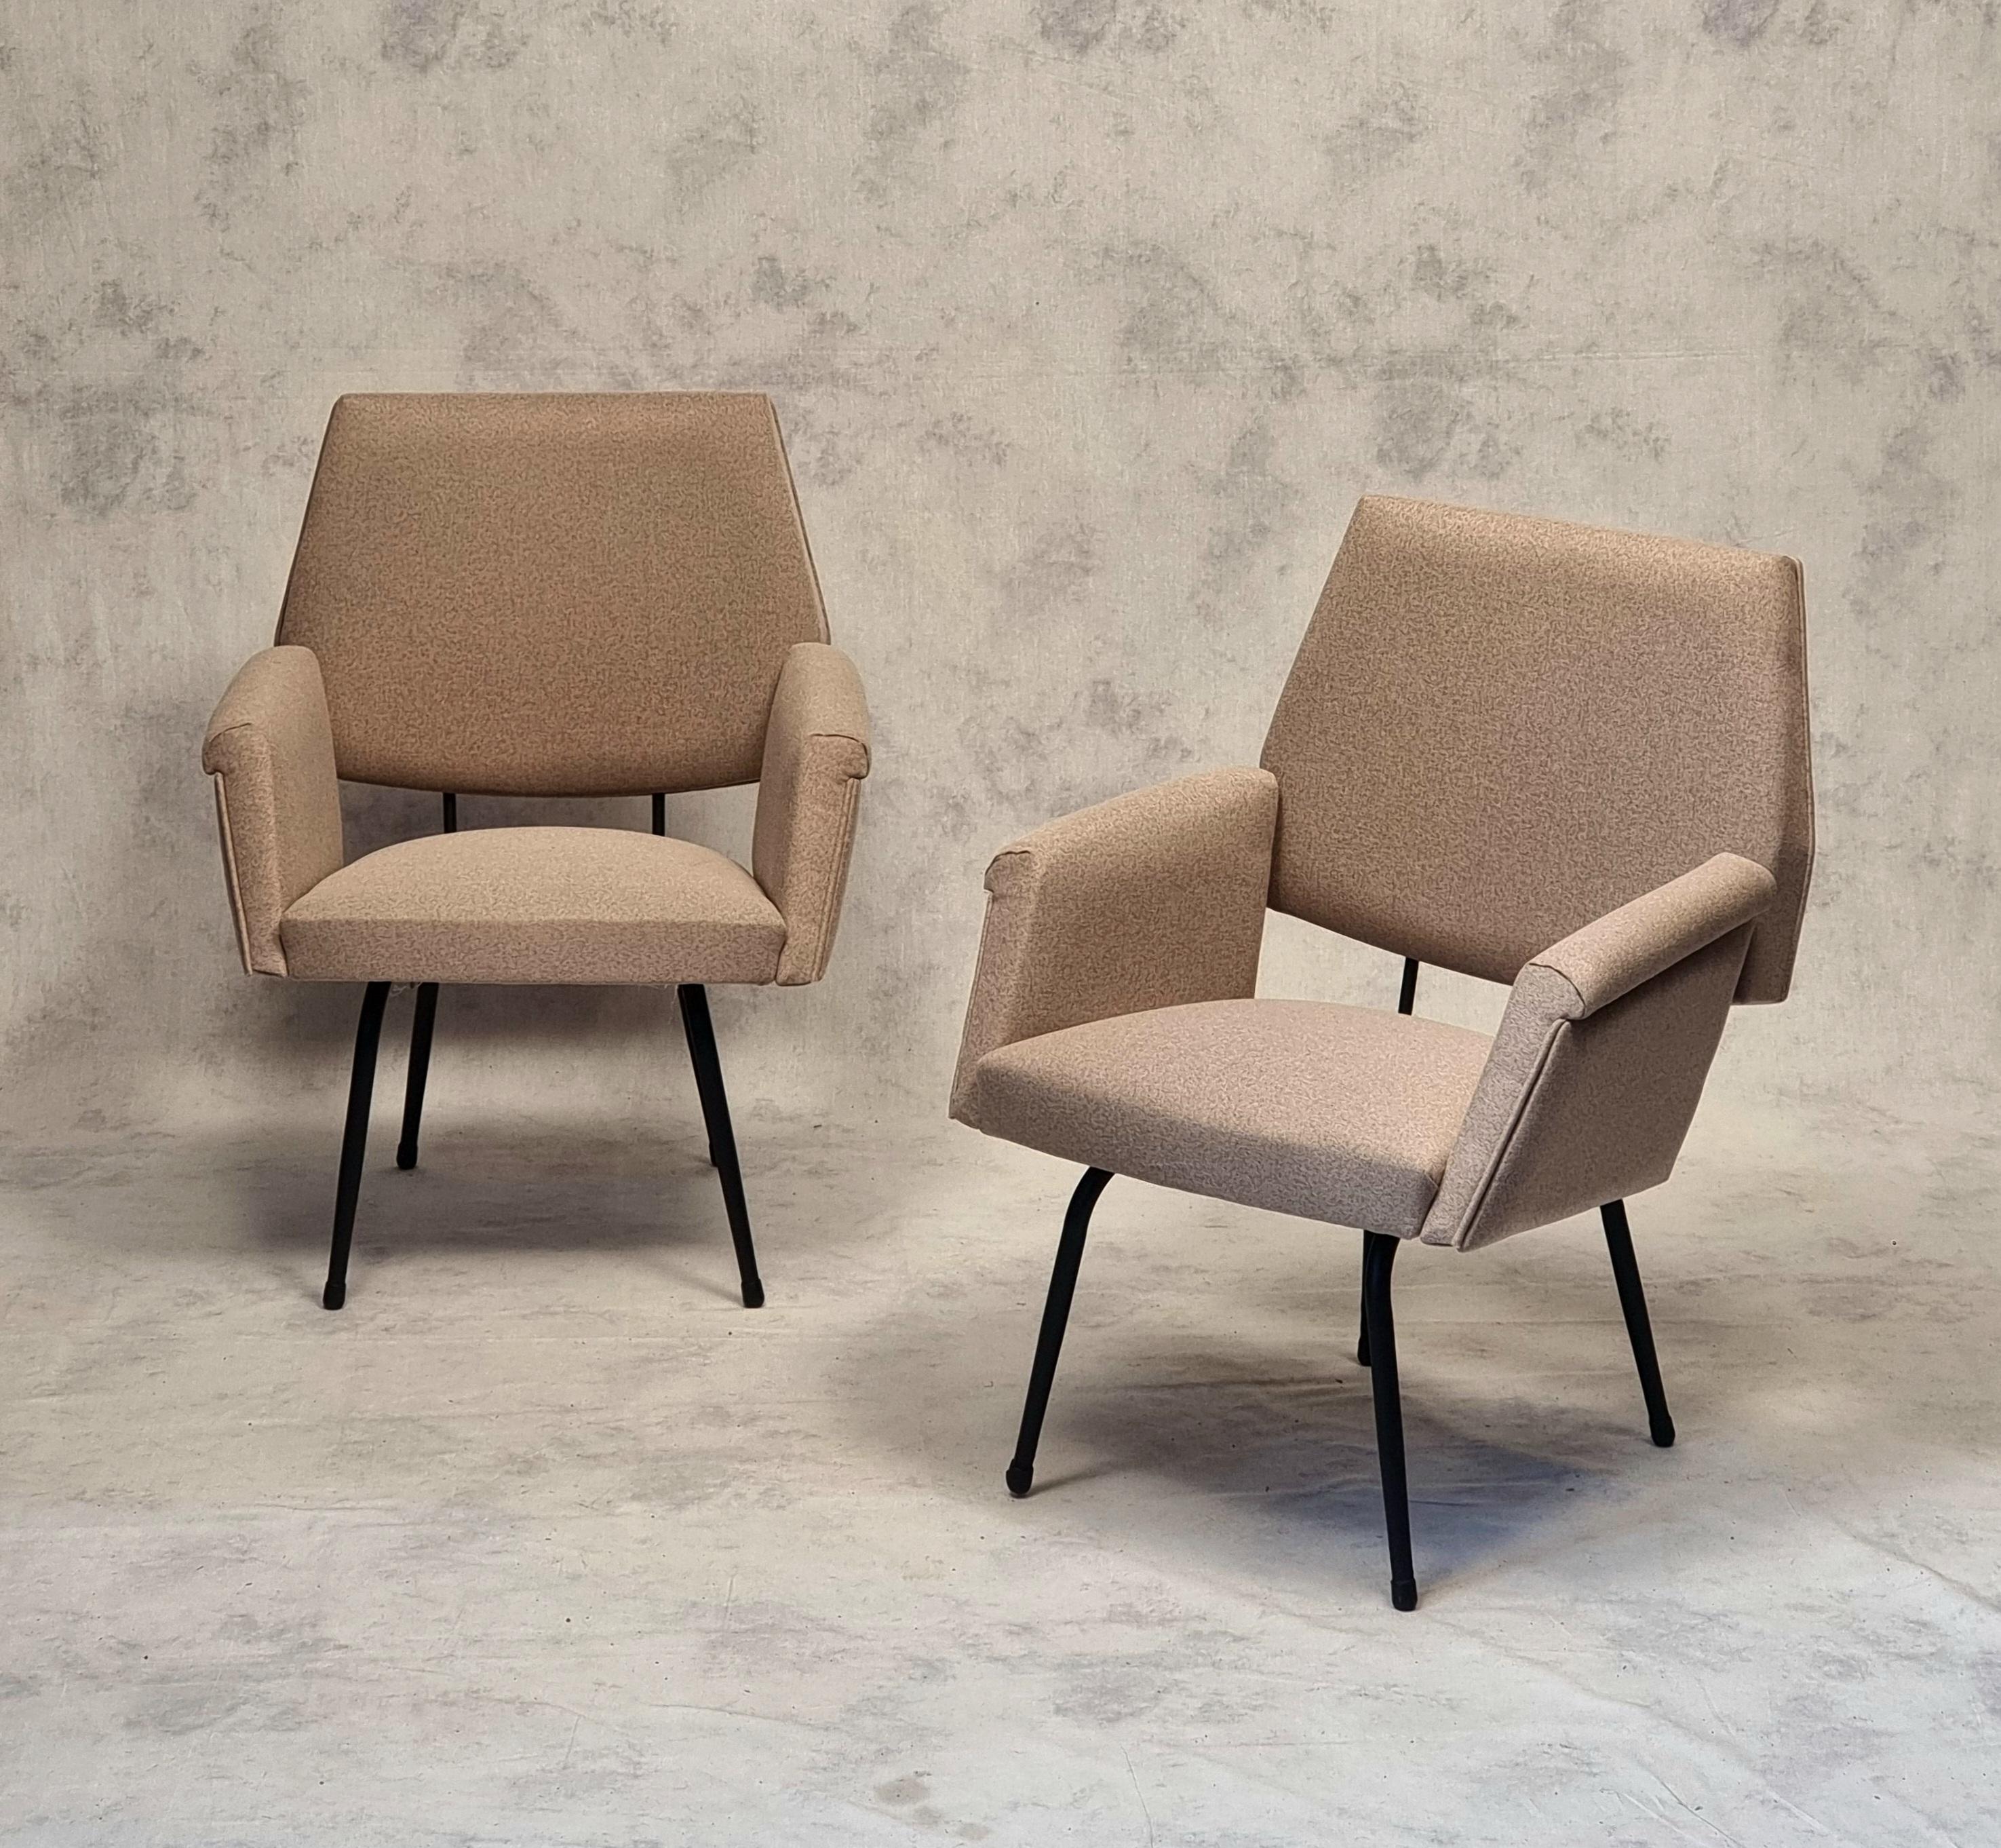 Pair of modernist armchairs from the 1950s. These armchairs of French origin are typical of the modernist movement. They are close to the work of Pierre Guariche in particular. They rest on a black lacquered tubular metal base. The armrests are